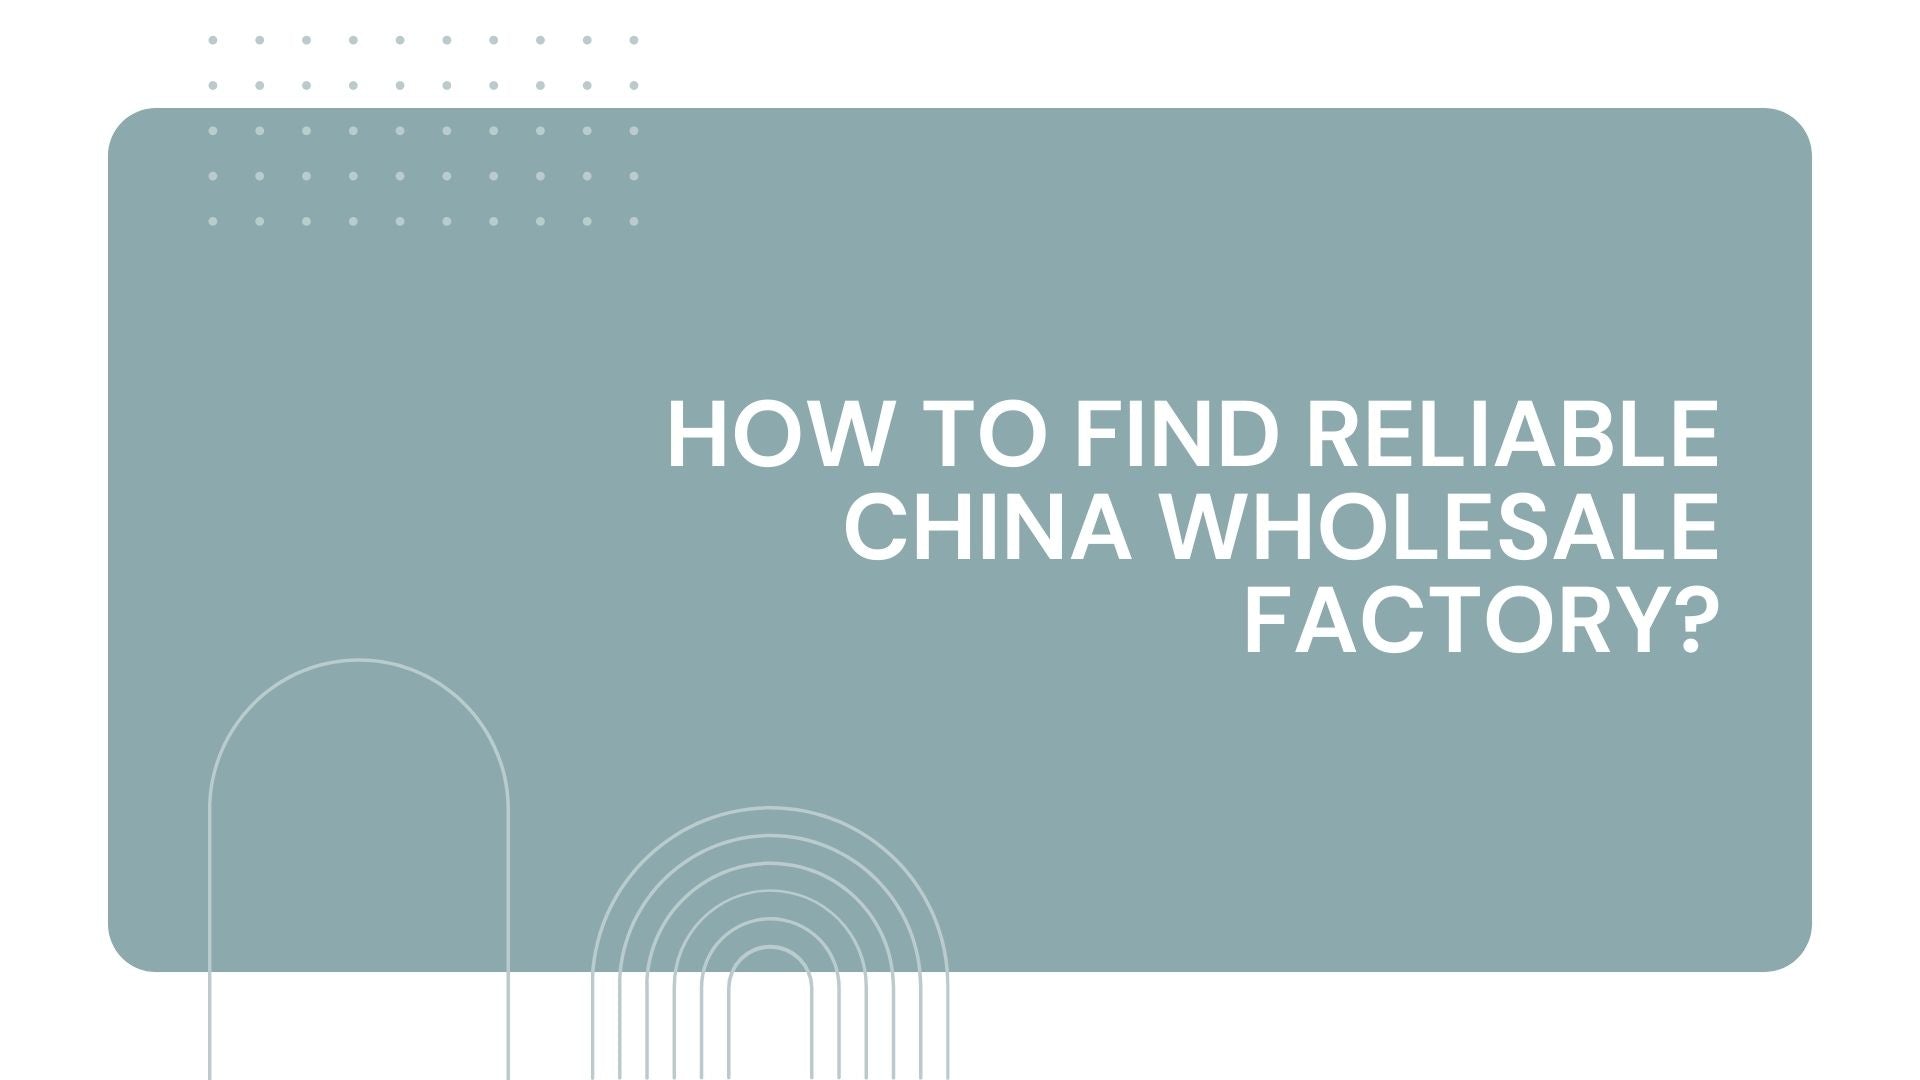 How to Find Reliable China Wholesale Factory?